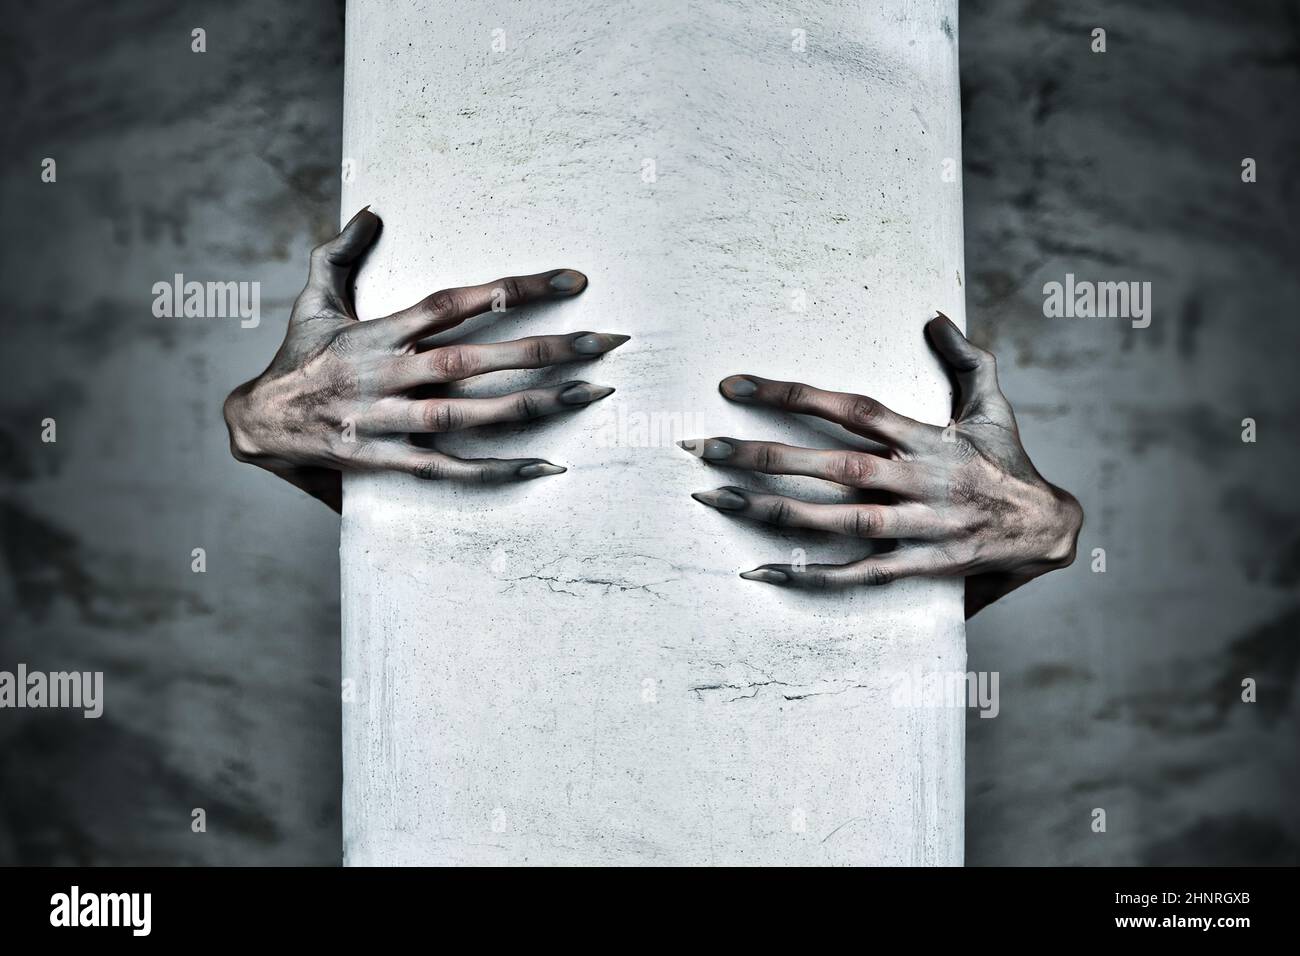 A Pair of Scary Hands Reach Out from Behind a COlumn Stock Photo